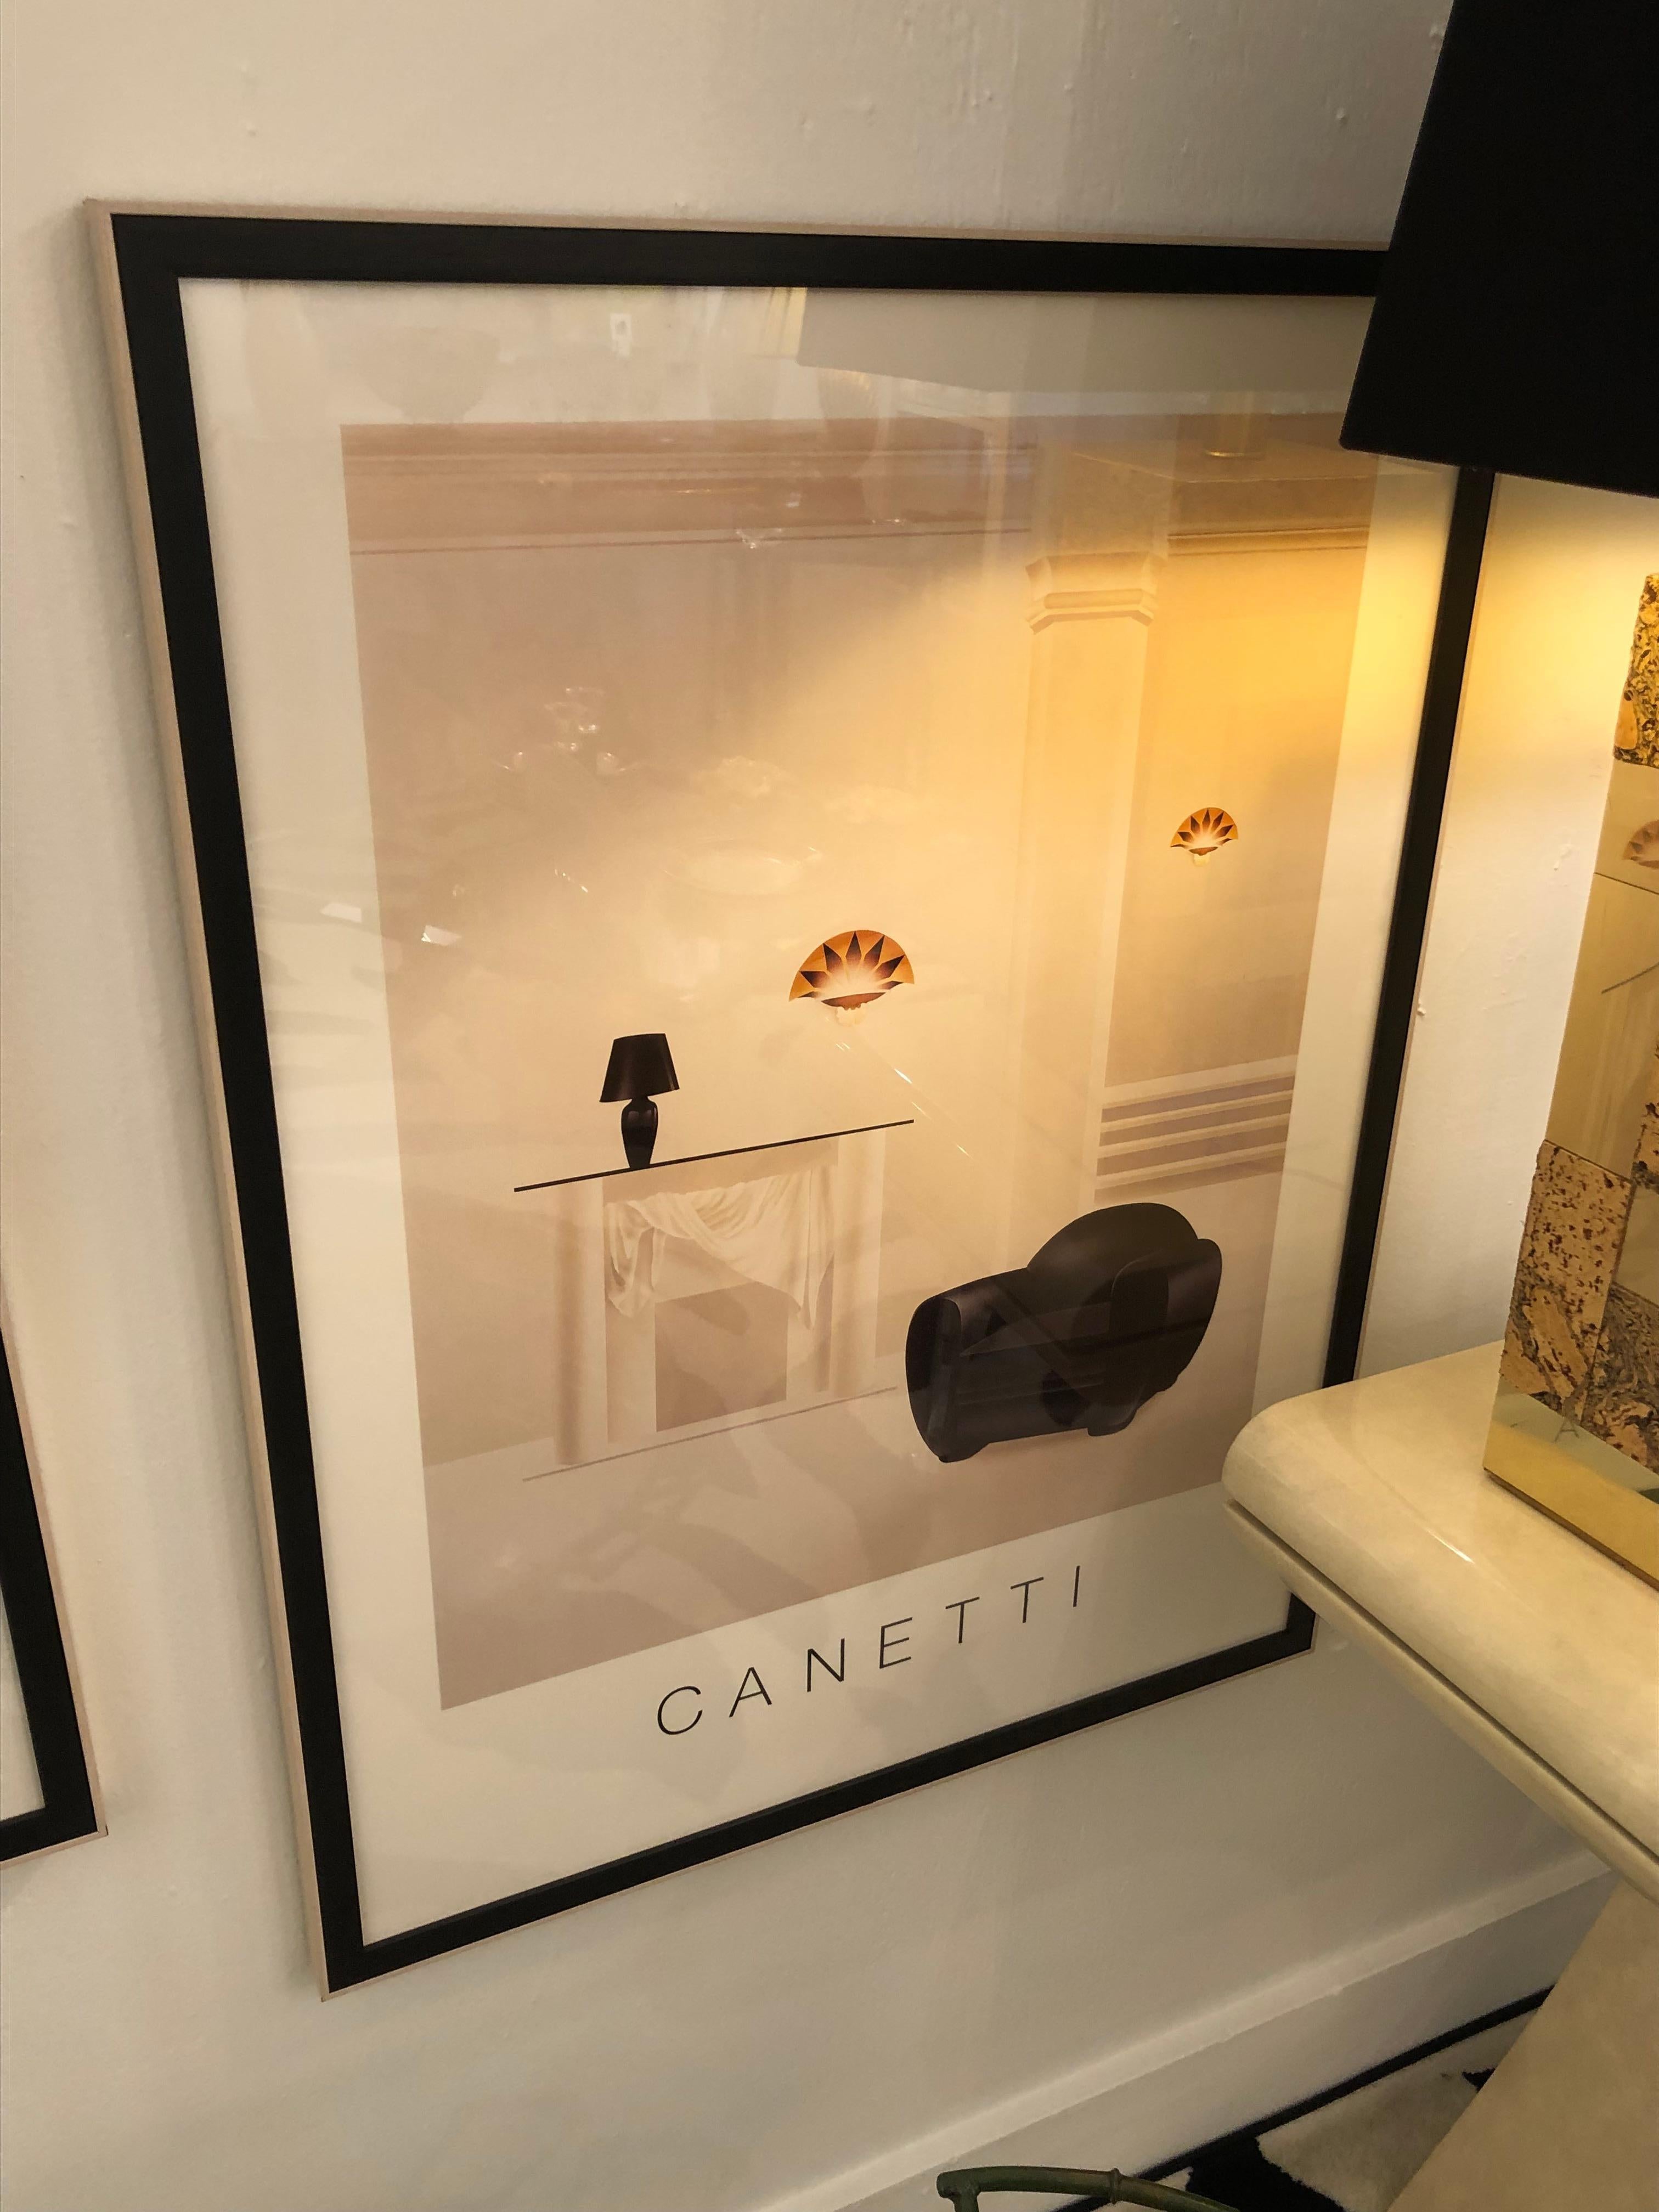 Paper Sophisticated Graphic Poster of Stylish Interior by Canetti For Sale